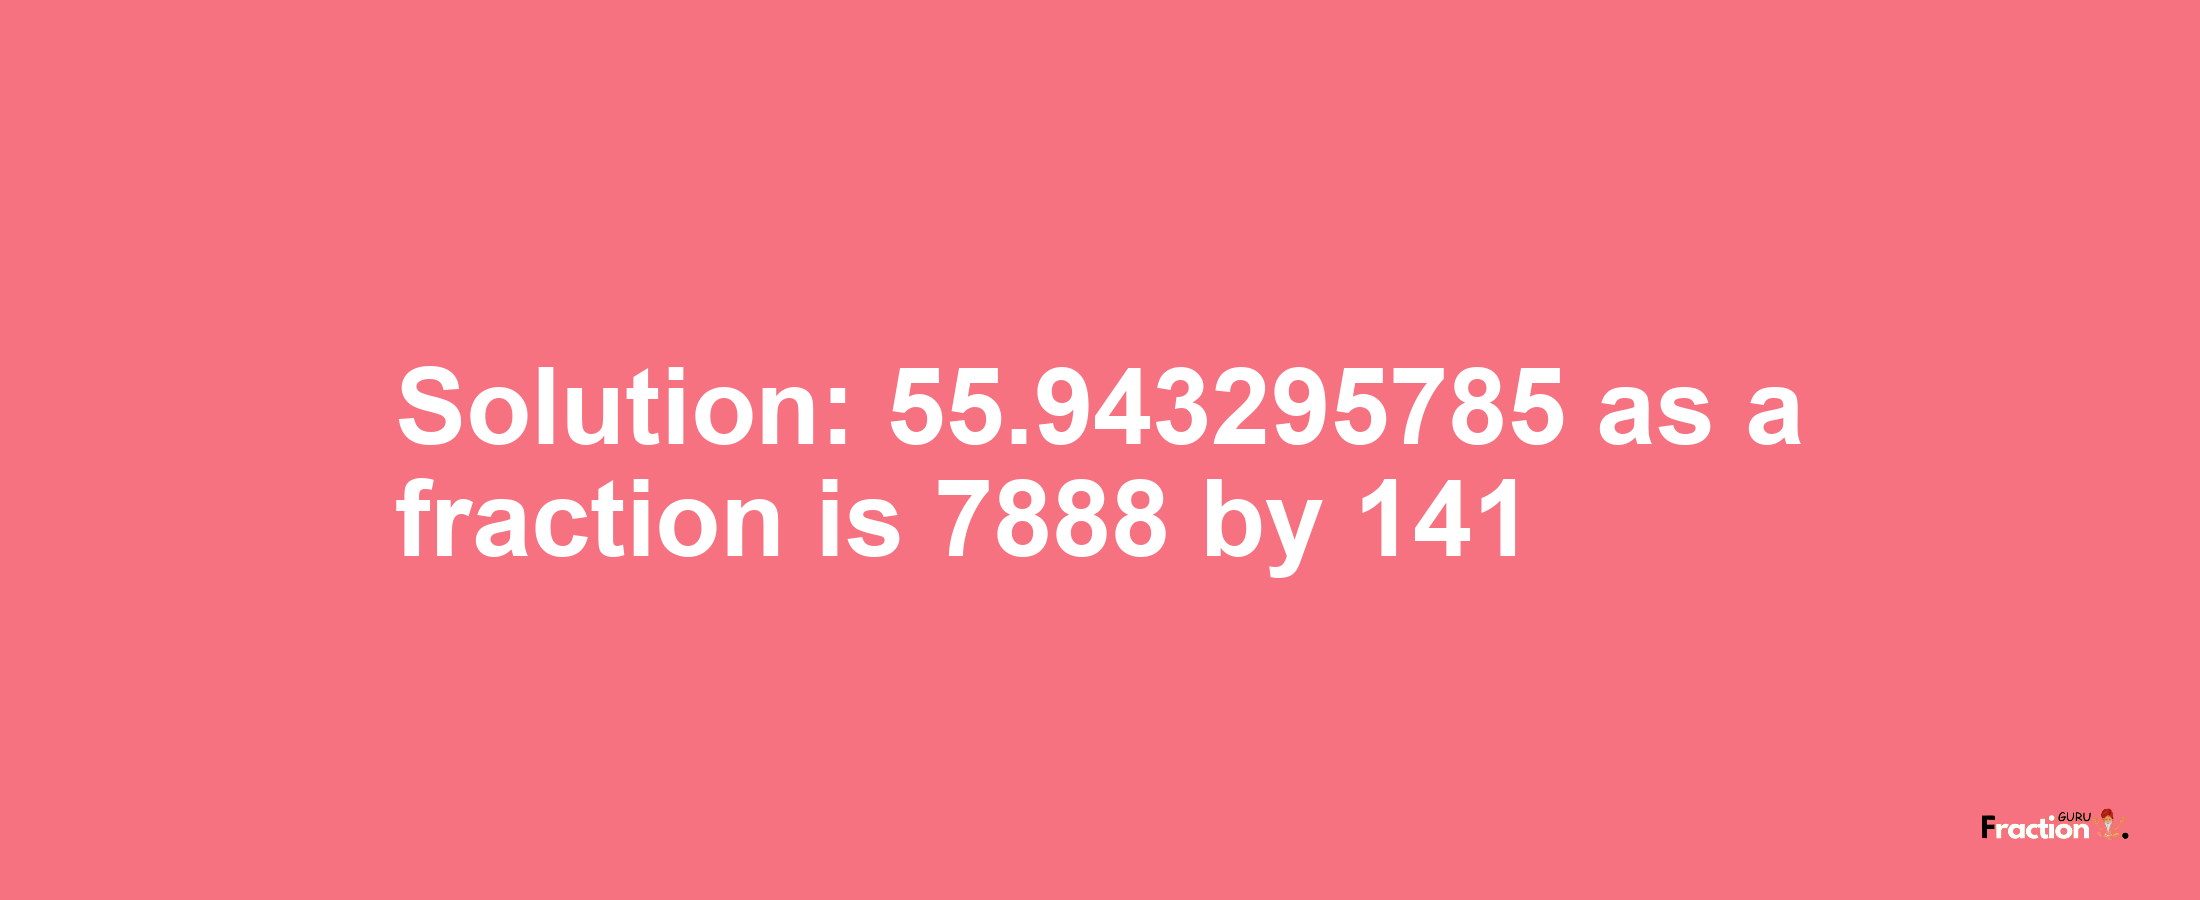 Solution:55.943295785 as a fraction is 7888/141